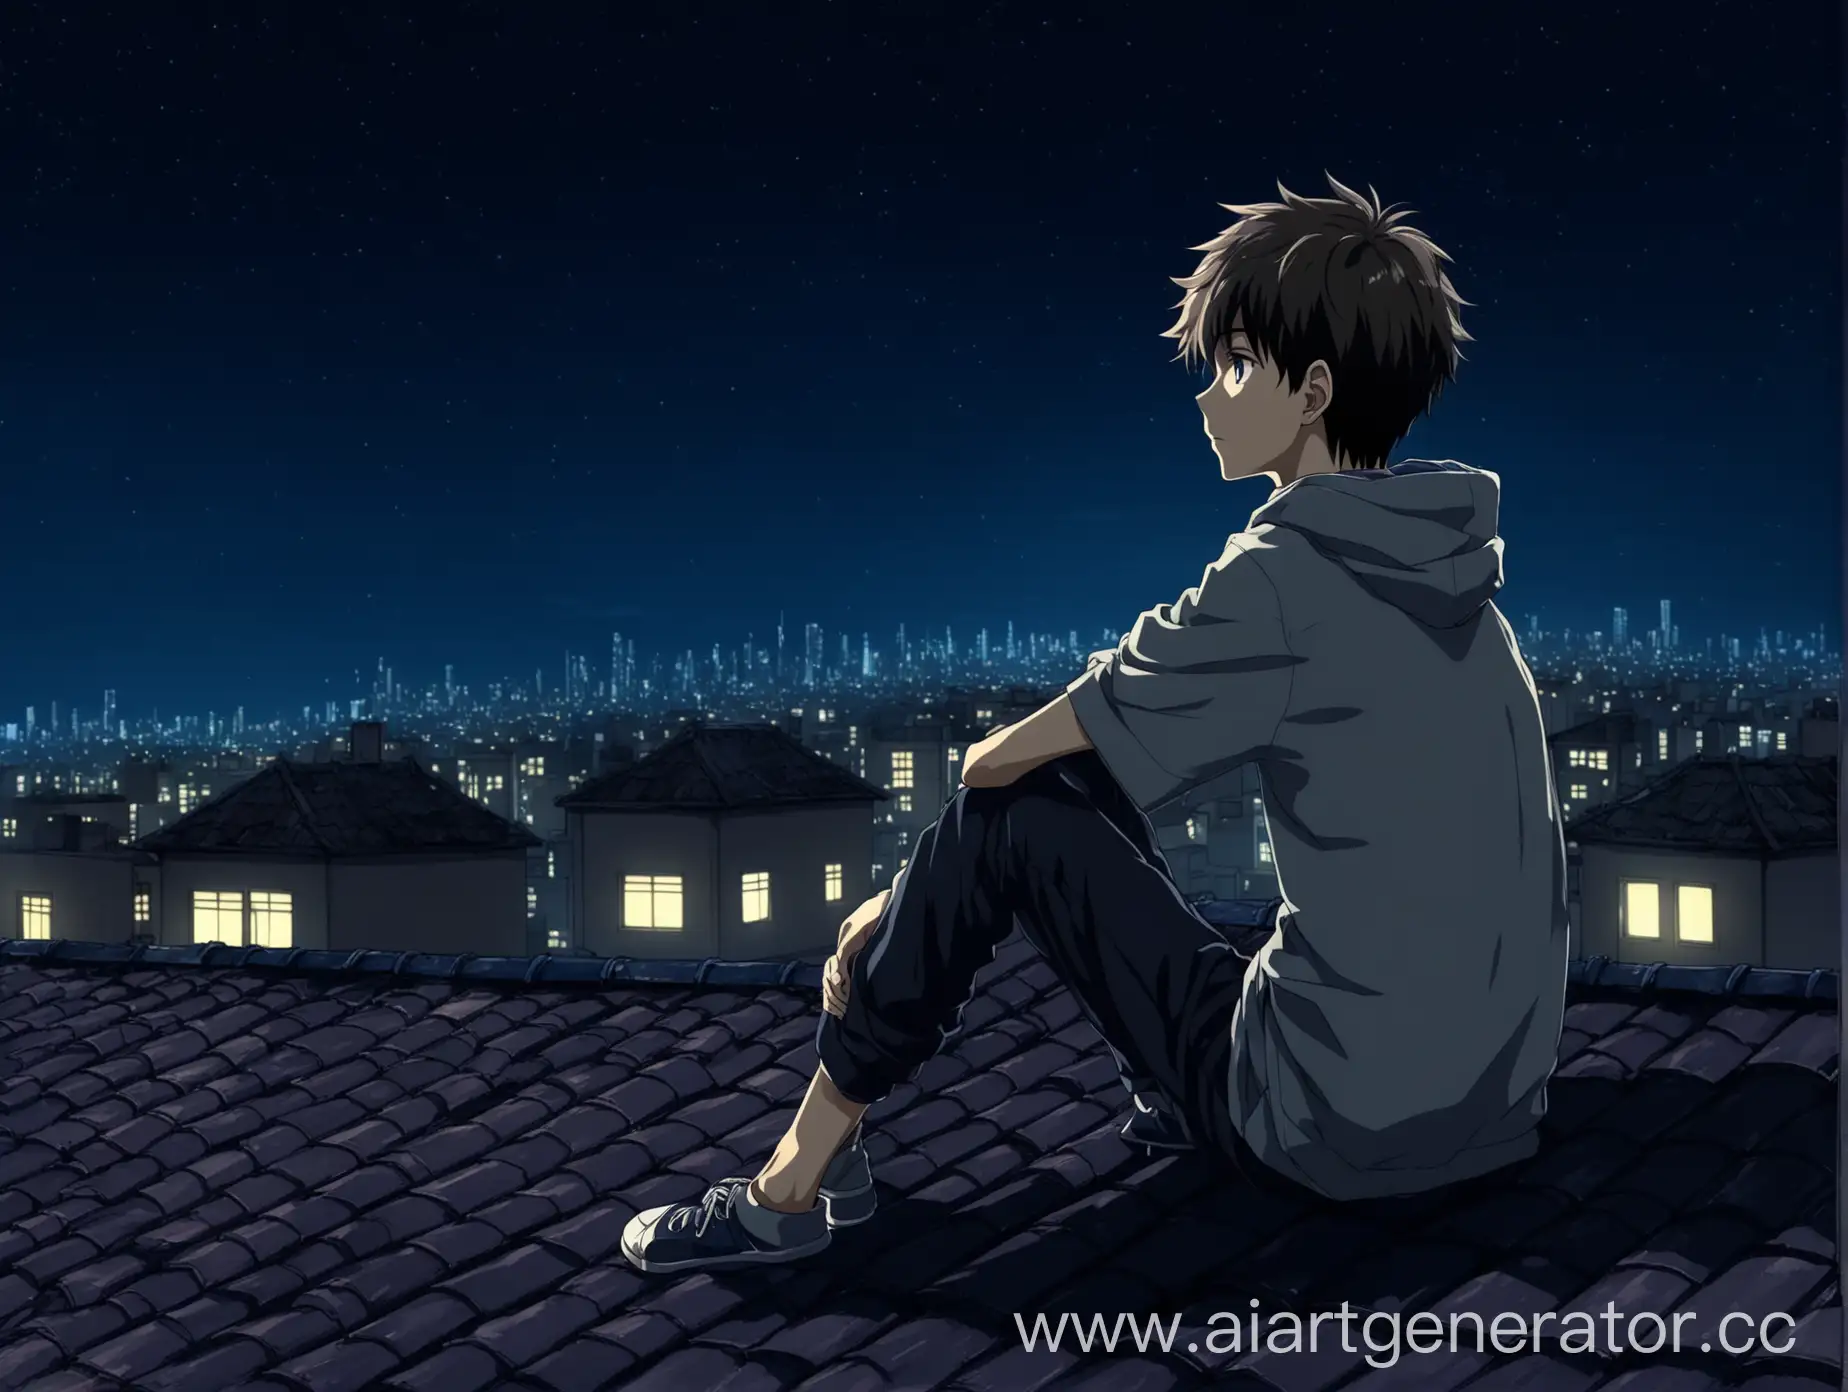 Teenage-Boy-Anime-Character-Contemplating-on-House-Rooftop-Overlooking-Night-Cityscape